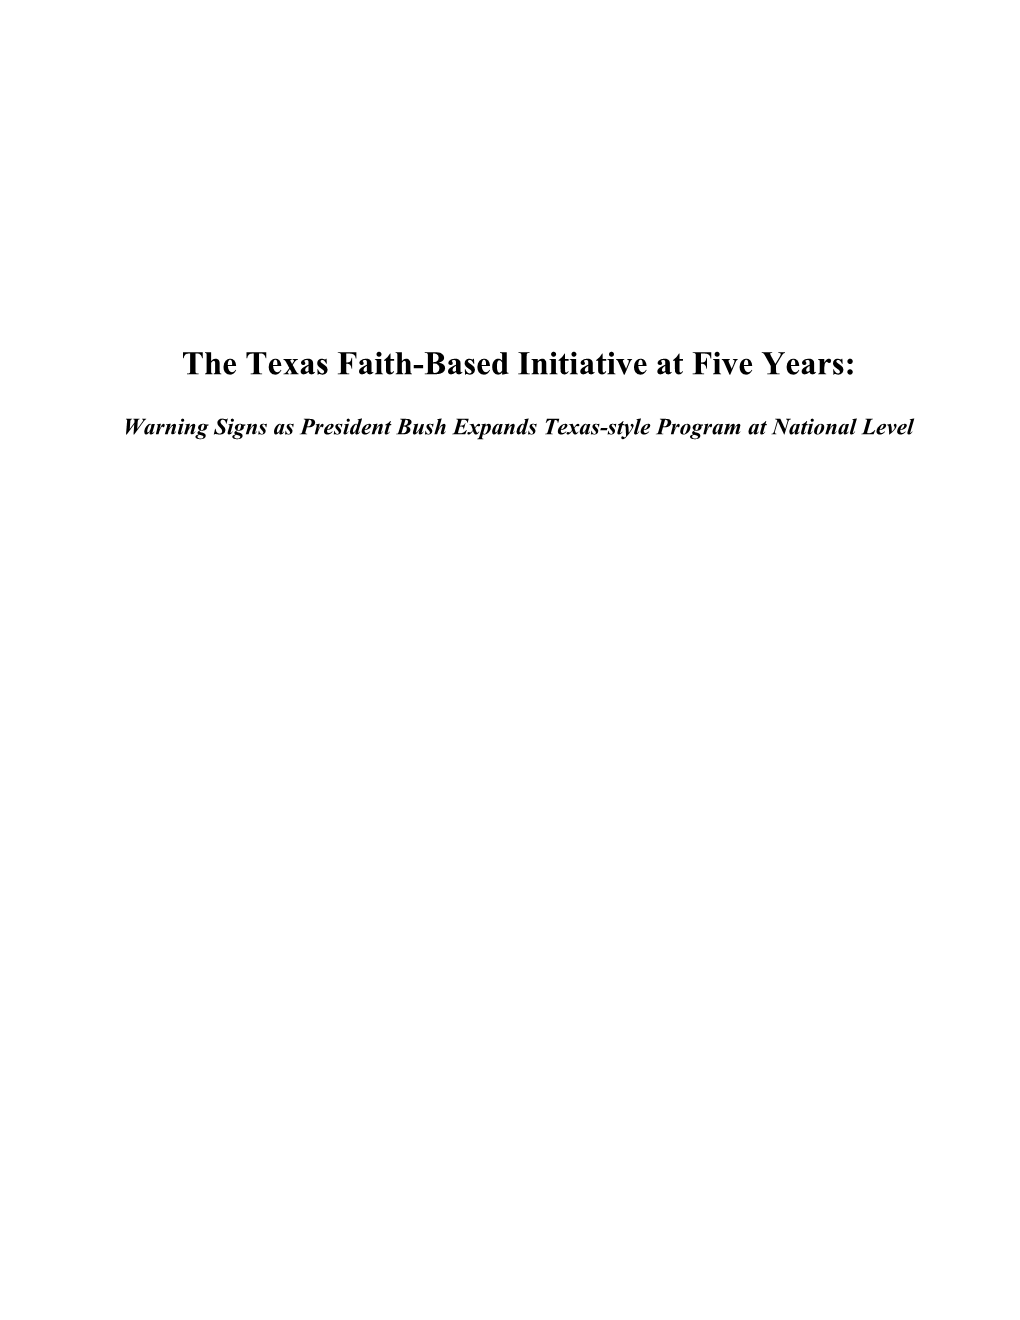 The Texas Faith-Based Initiative at Five Years